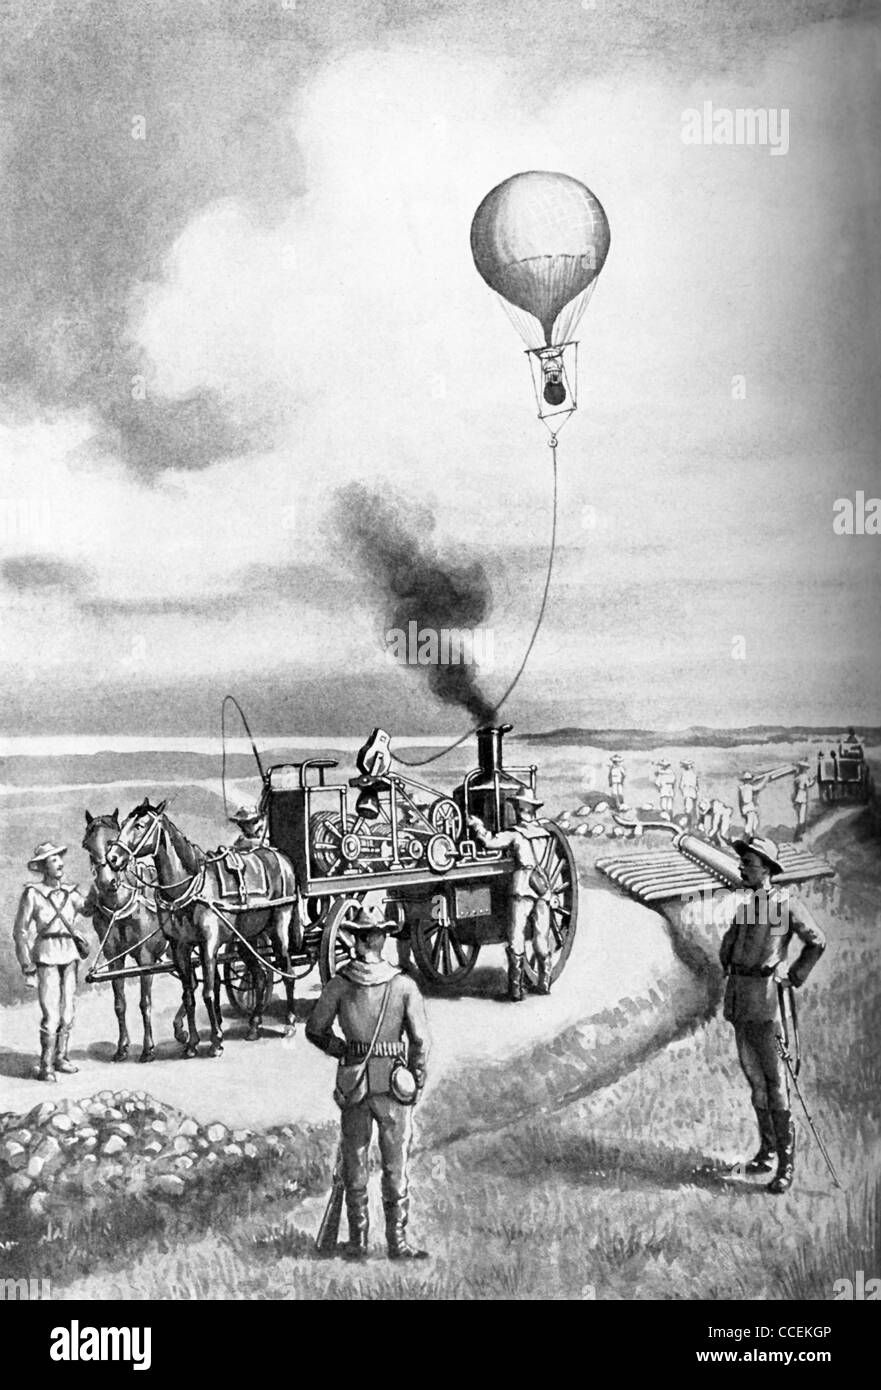 Americans are shown using a war balloon in Mexican-American War, tethered by a rope to a steam engine that was pulled by horses. Stock Photo